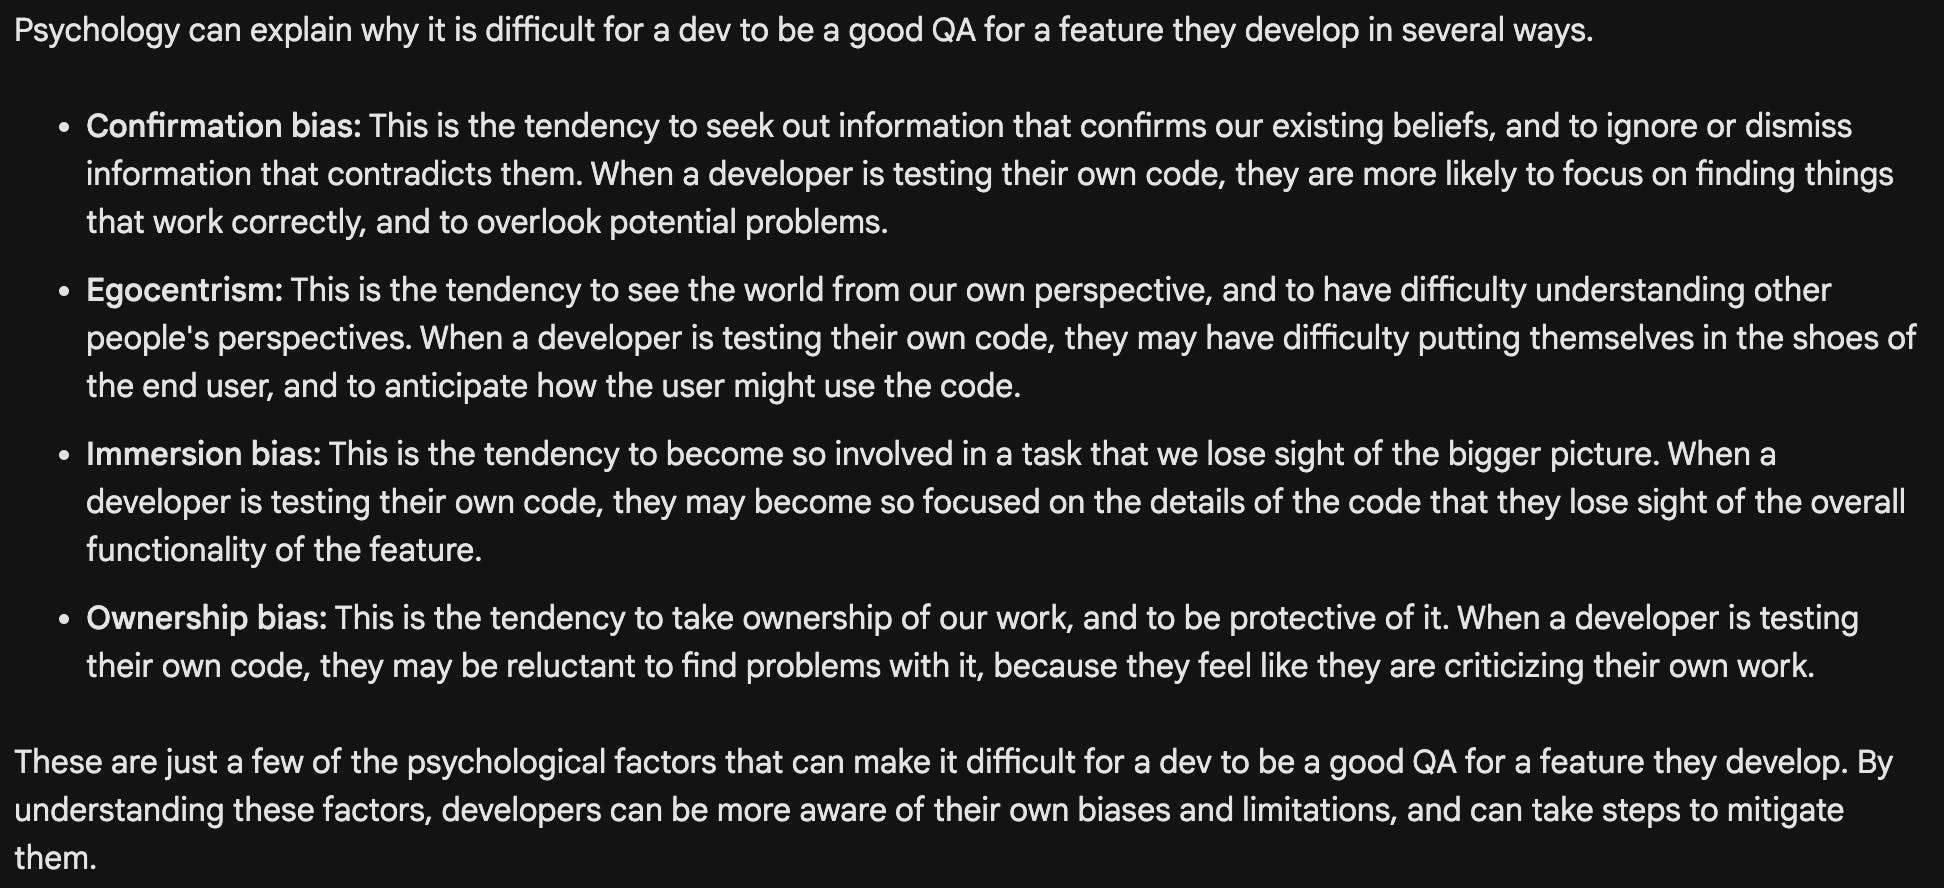 Bard's response to "what psychology-based reasons are there for why a dev is not good at QA for a feature they develop?"